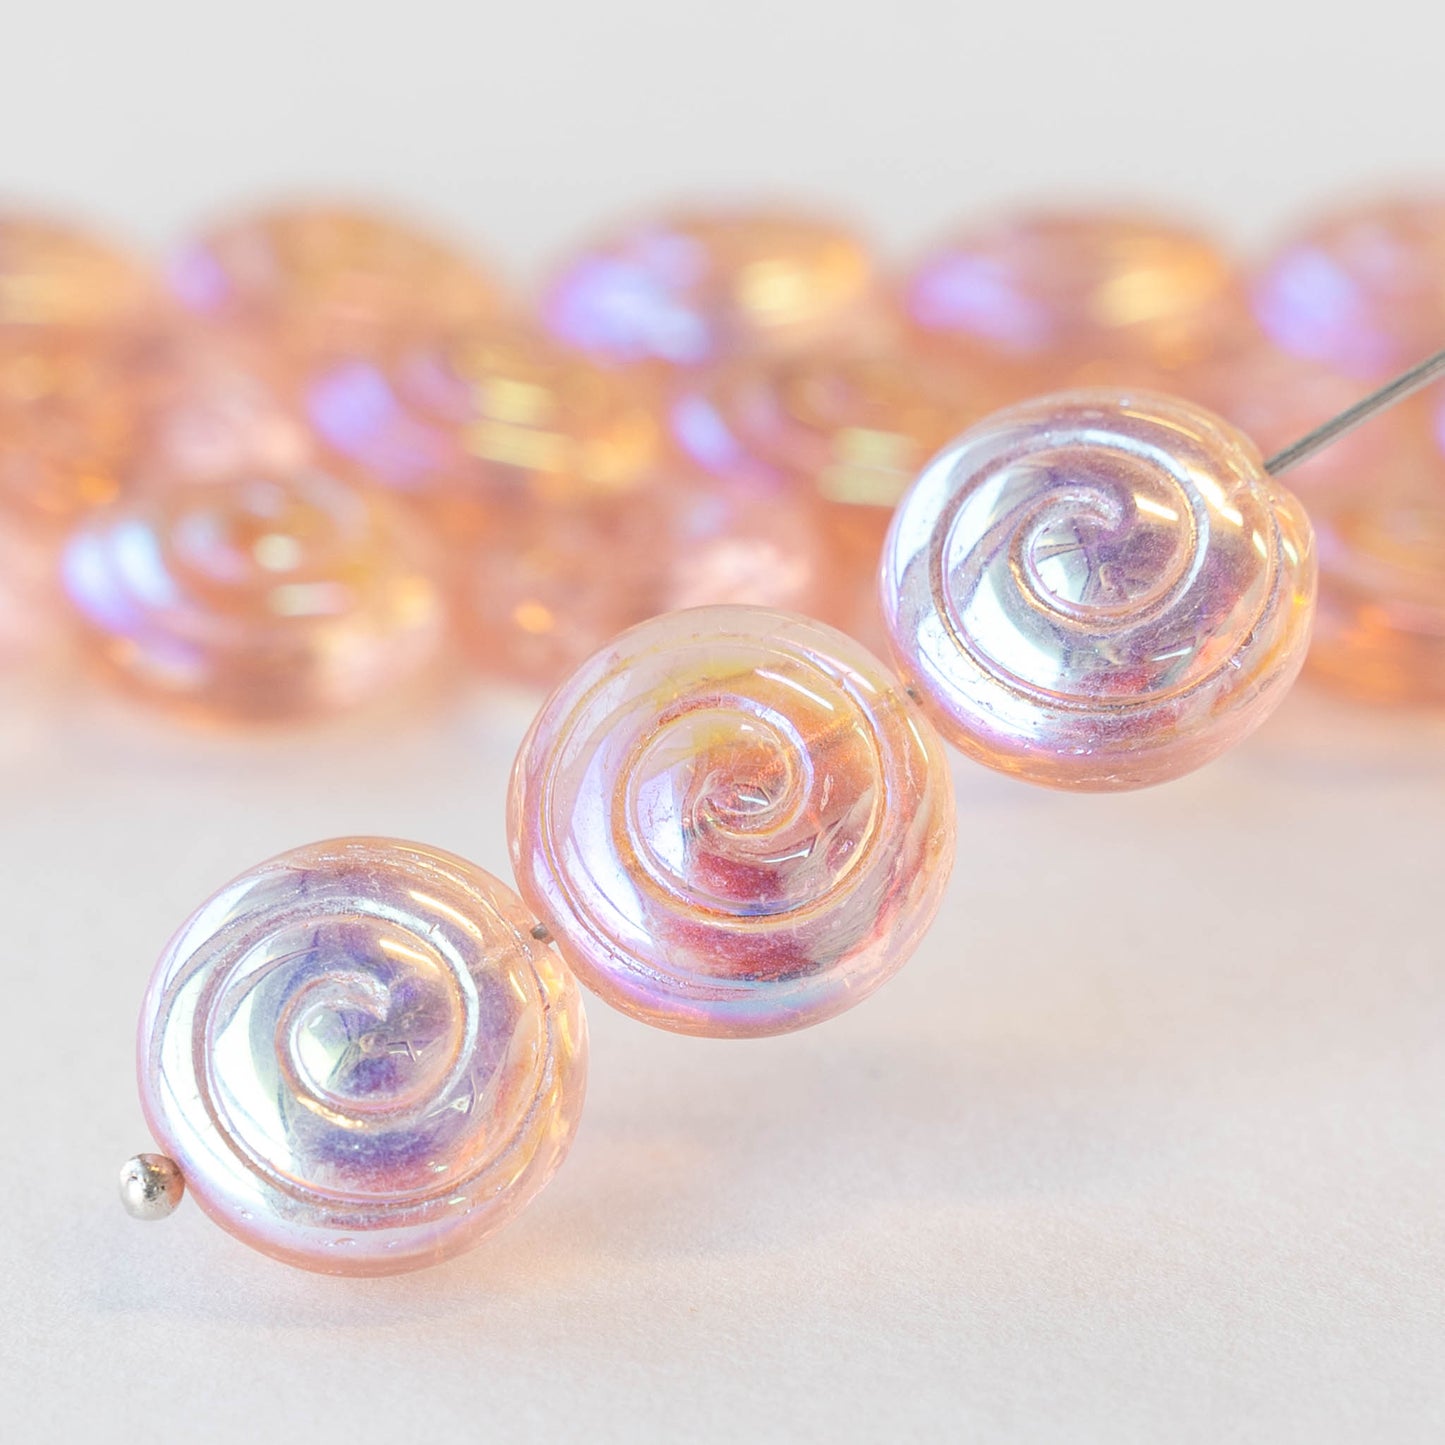 13mm Spiral Coin Beads - Pink AB - 10 beads